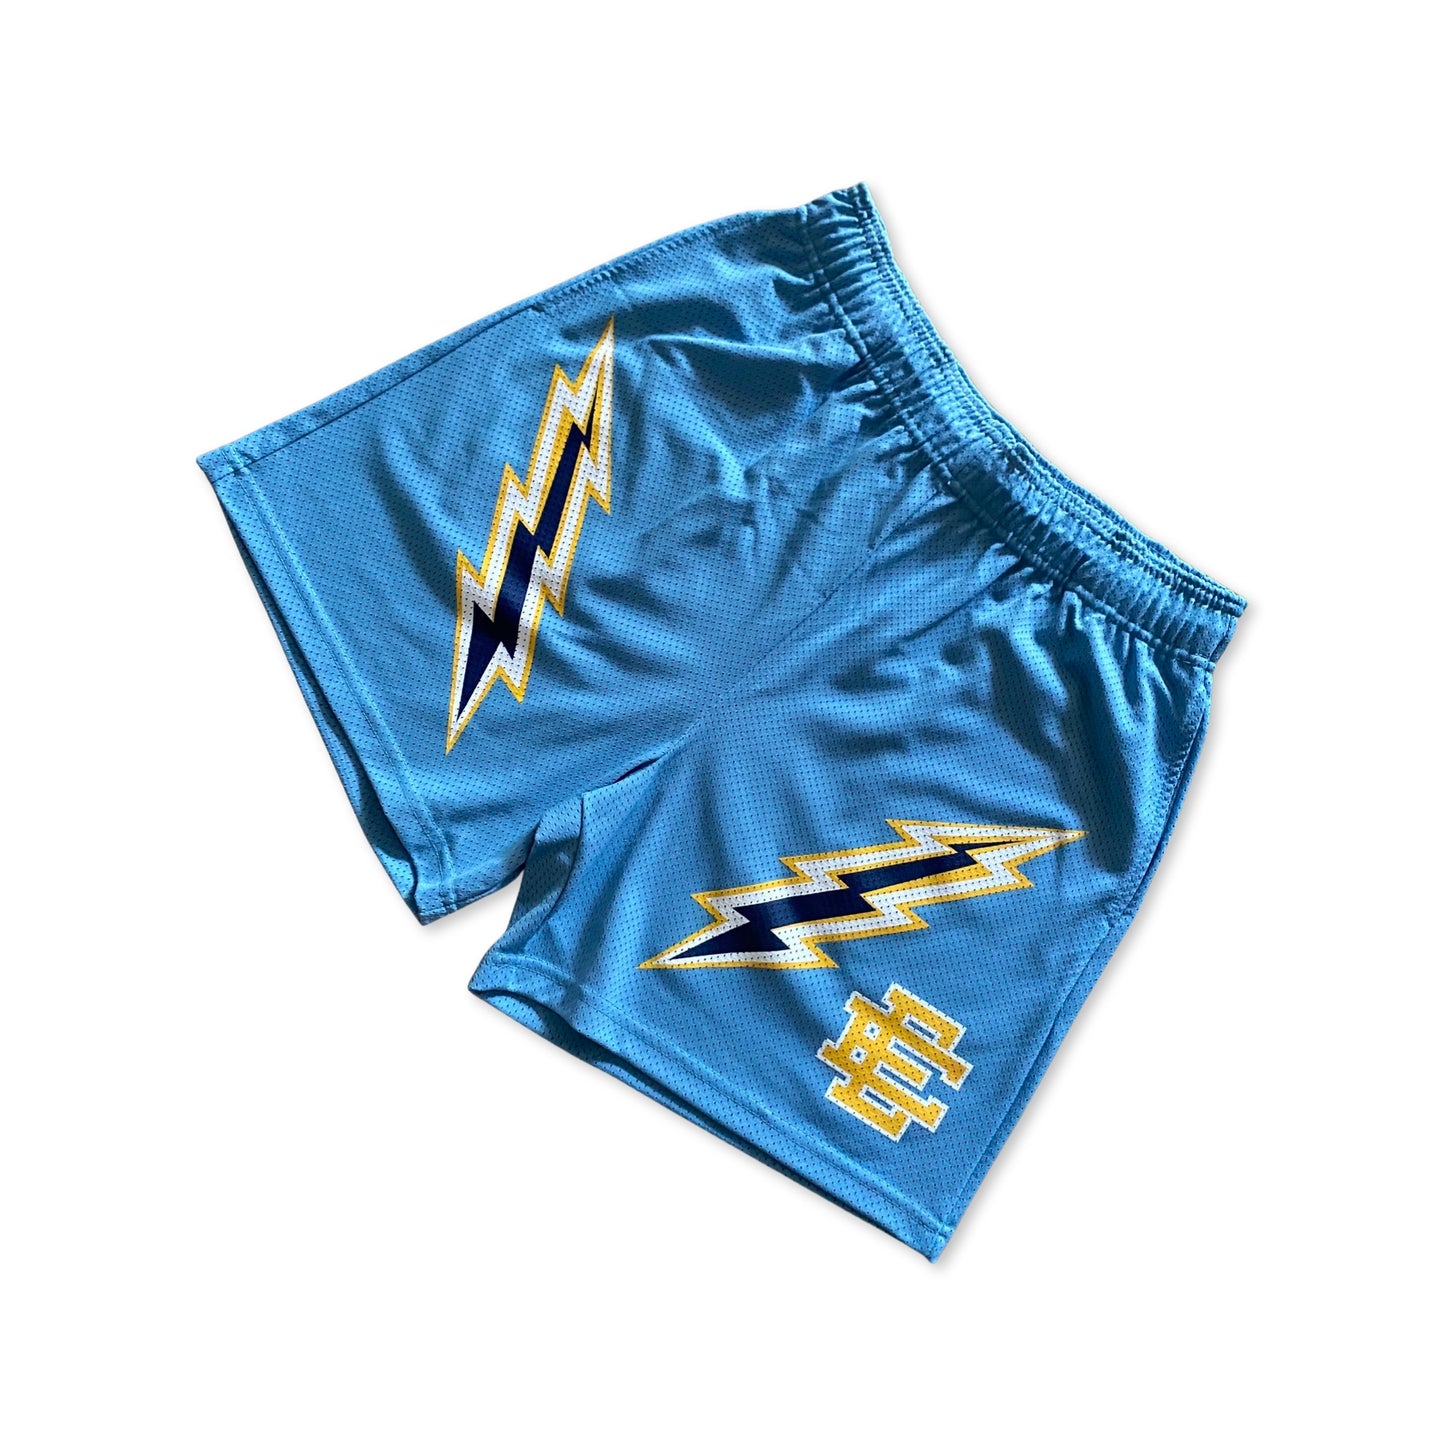 Eric Emanuel Chargers Shorts